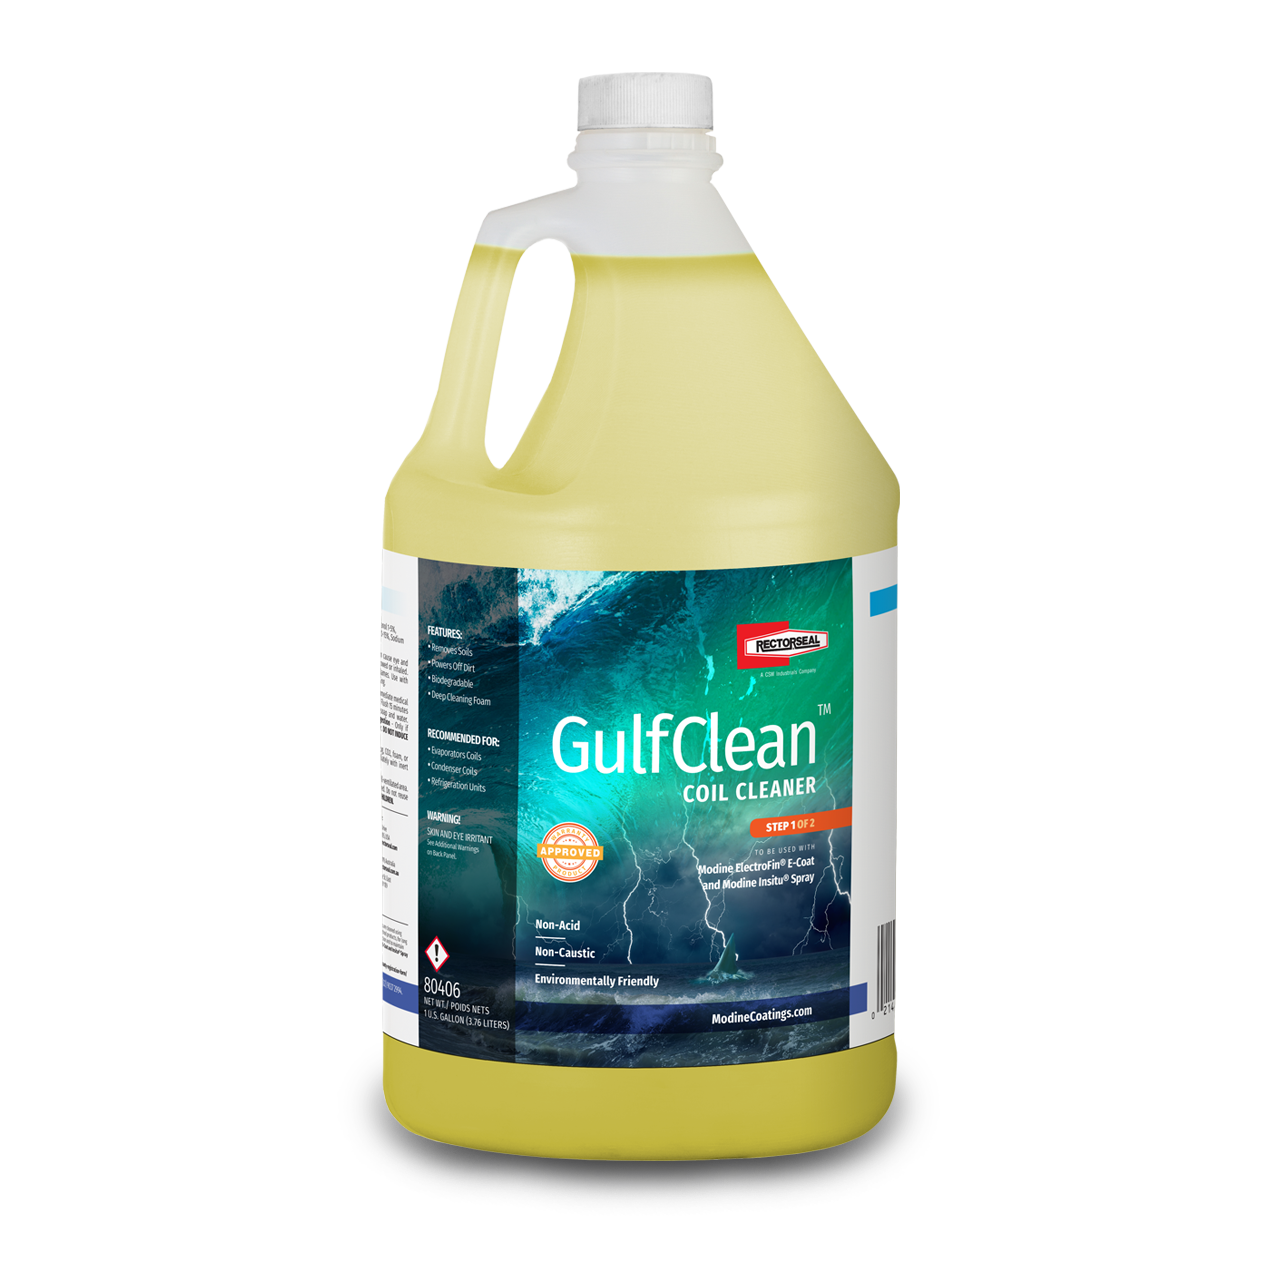 80406-GulfClean-CoilCleaner-Gallon-Image-IMG